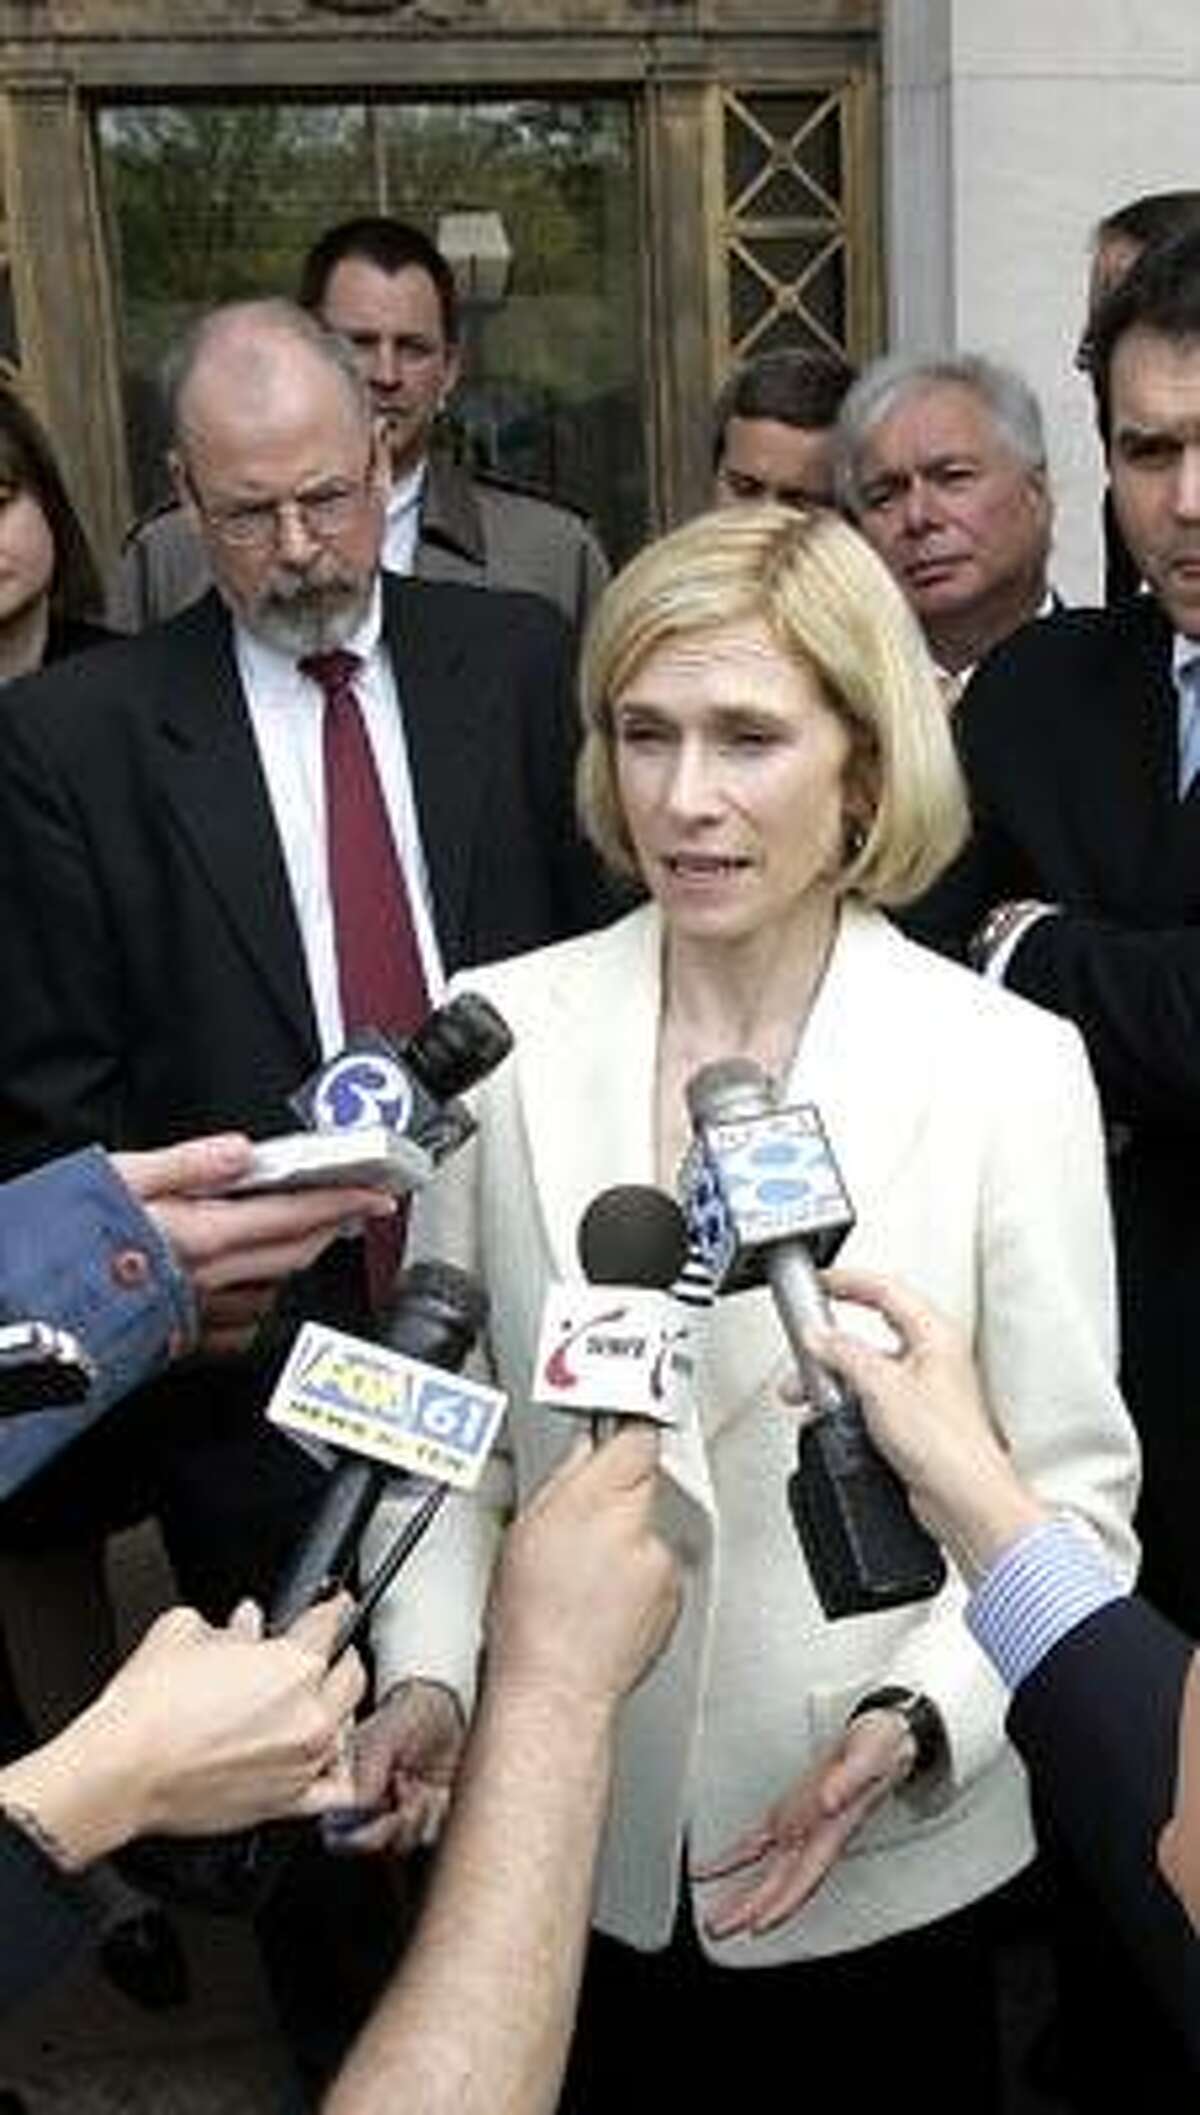 Assistant U.S. Attorney Nora Dannehy speaks with reporters after state contractor William Tomasso and former Connecticut Gov. John G. Rowland's Co-Chief of Staff Peter Ellef were sentenced to 30 months in federal prison on corruption charges Tuesday, April 25, 2006, in New Haven, Conn. (AP Photo/Bob Child)